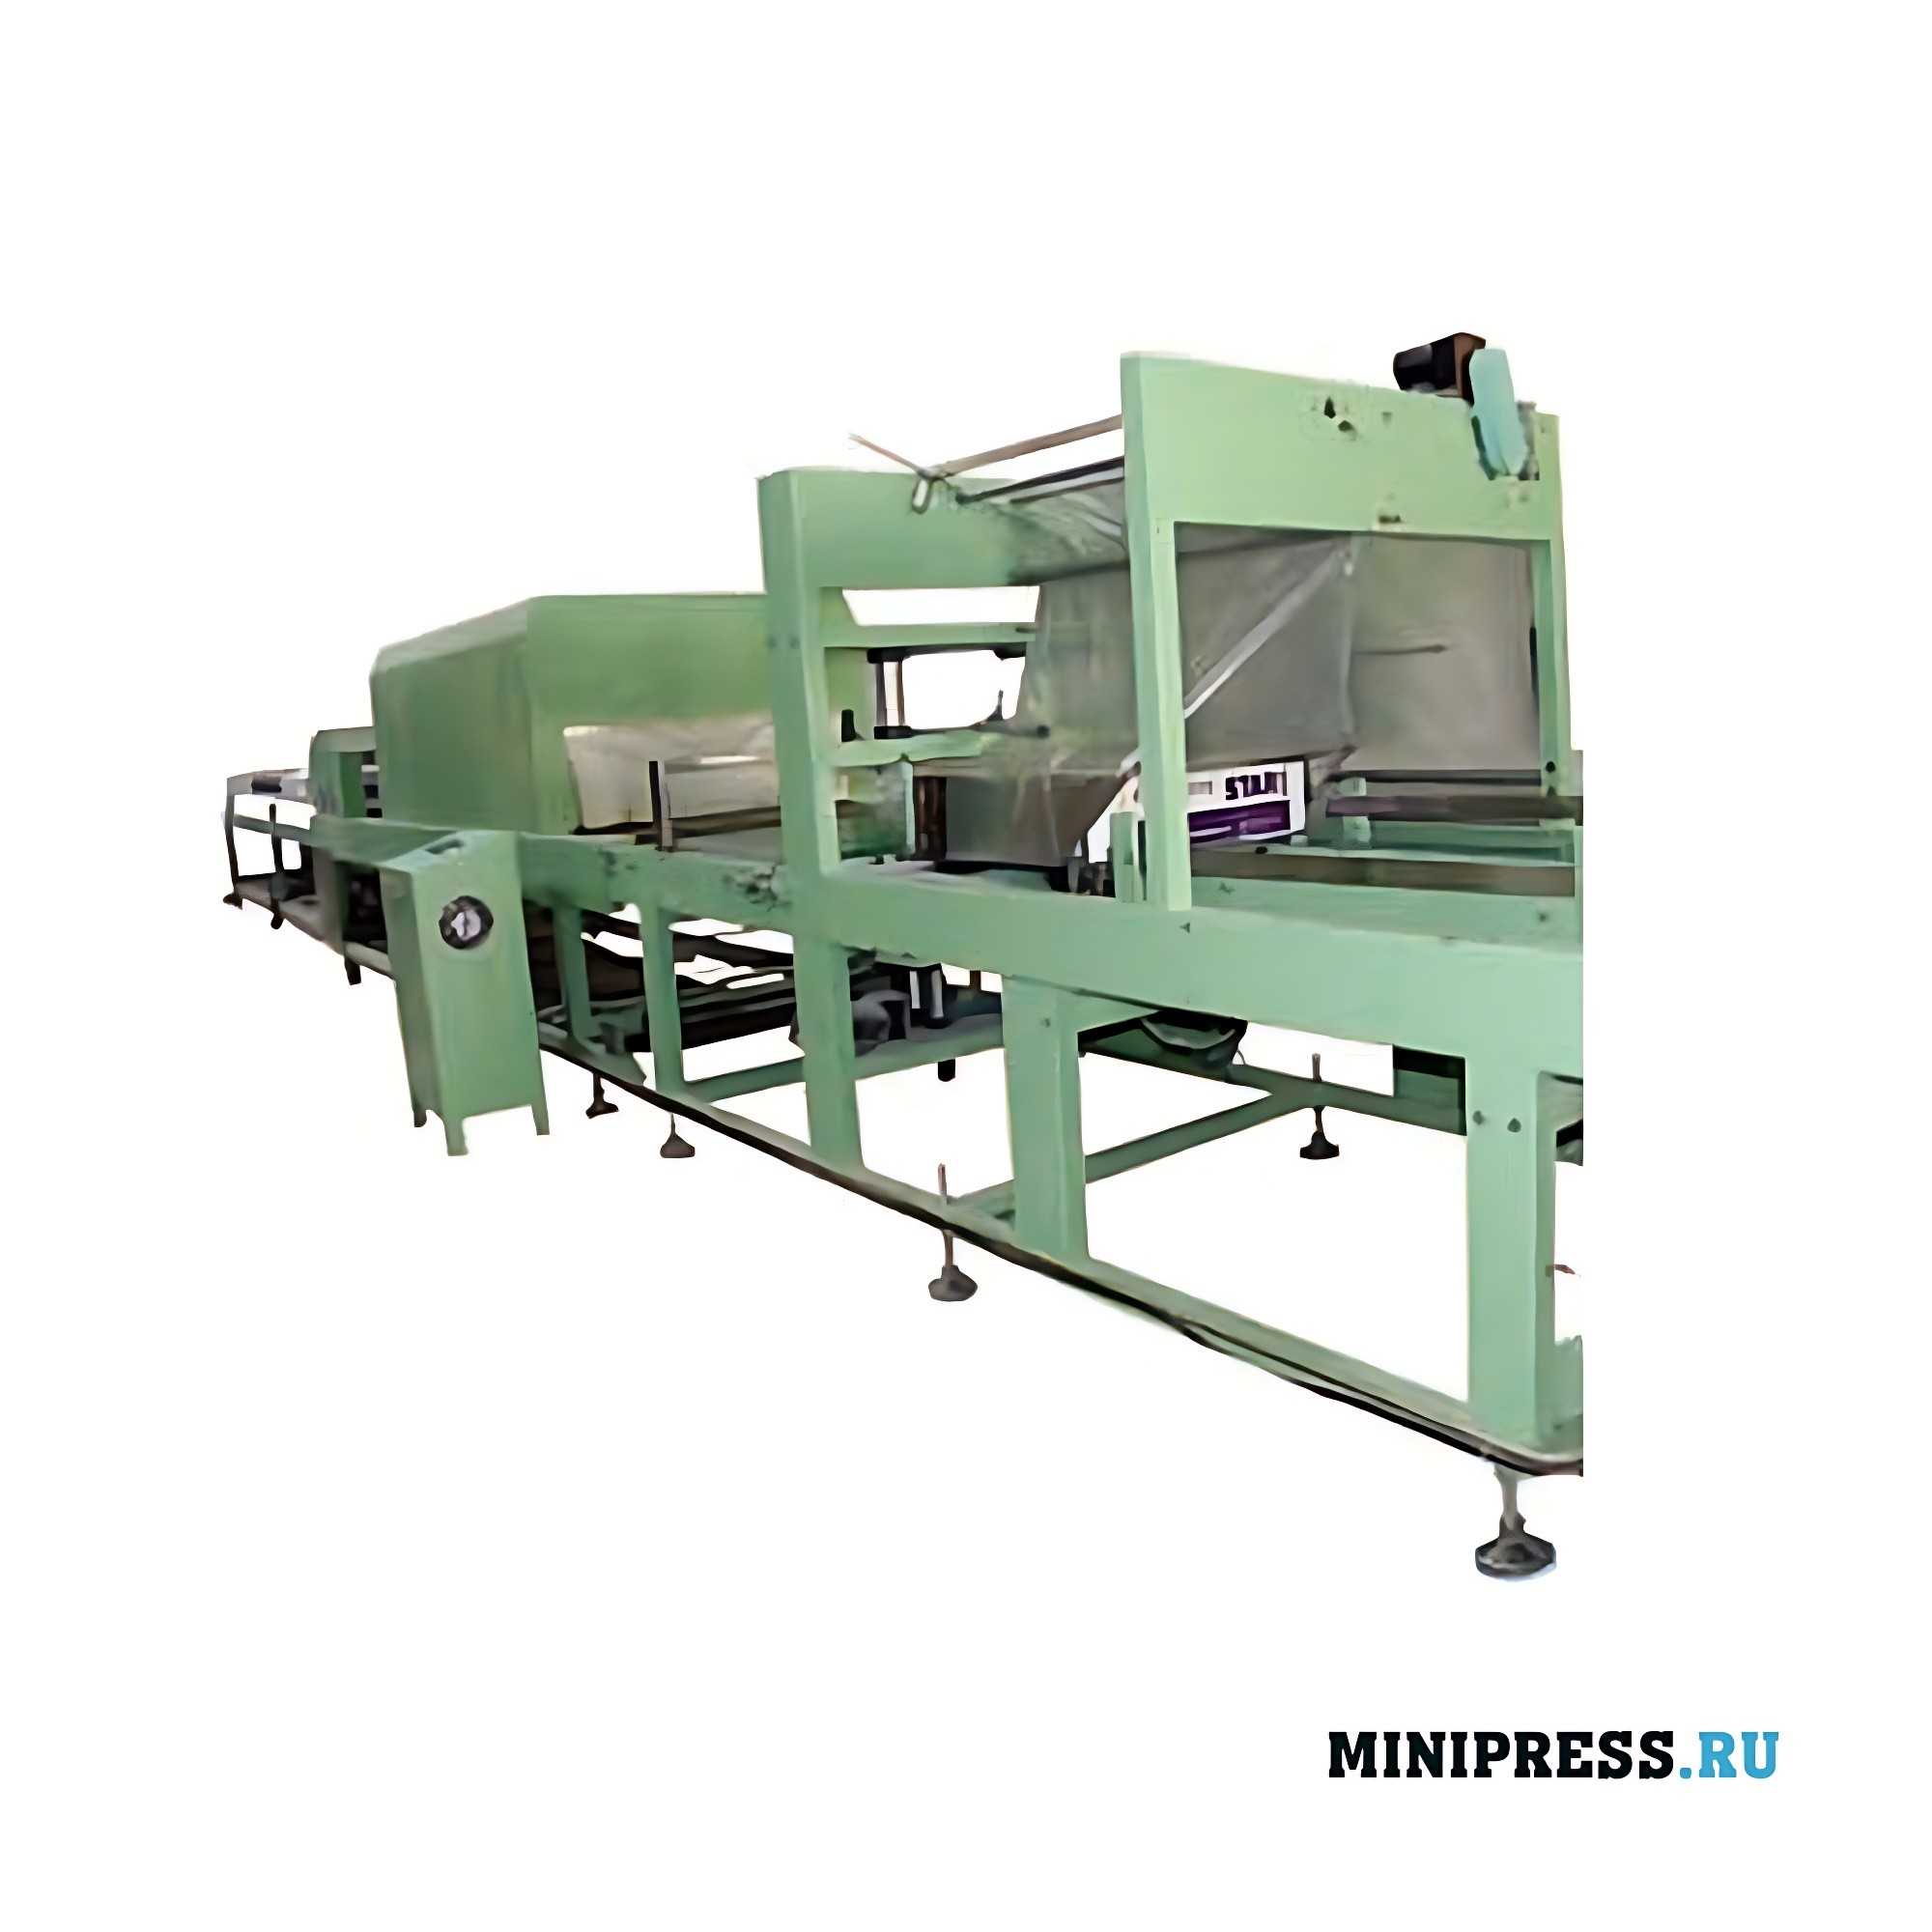 Shrink wrapping equipment for film sealing BSP-11